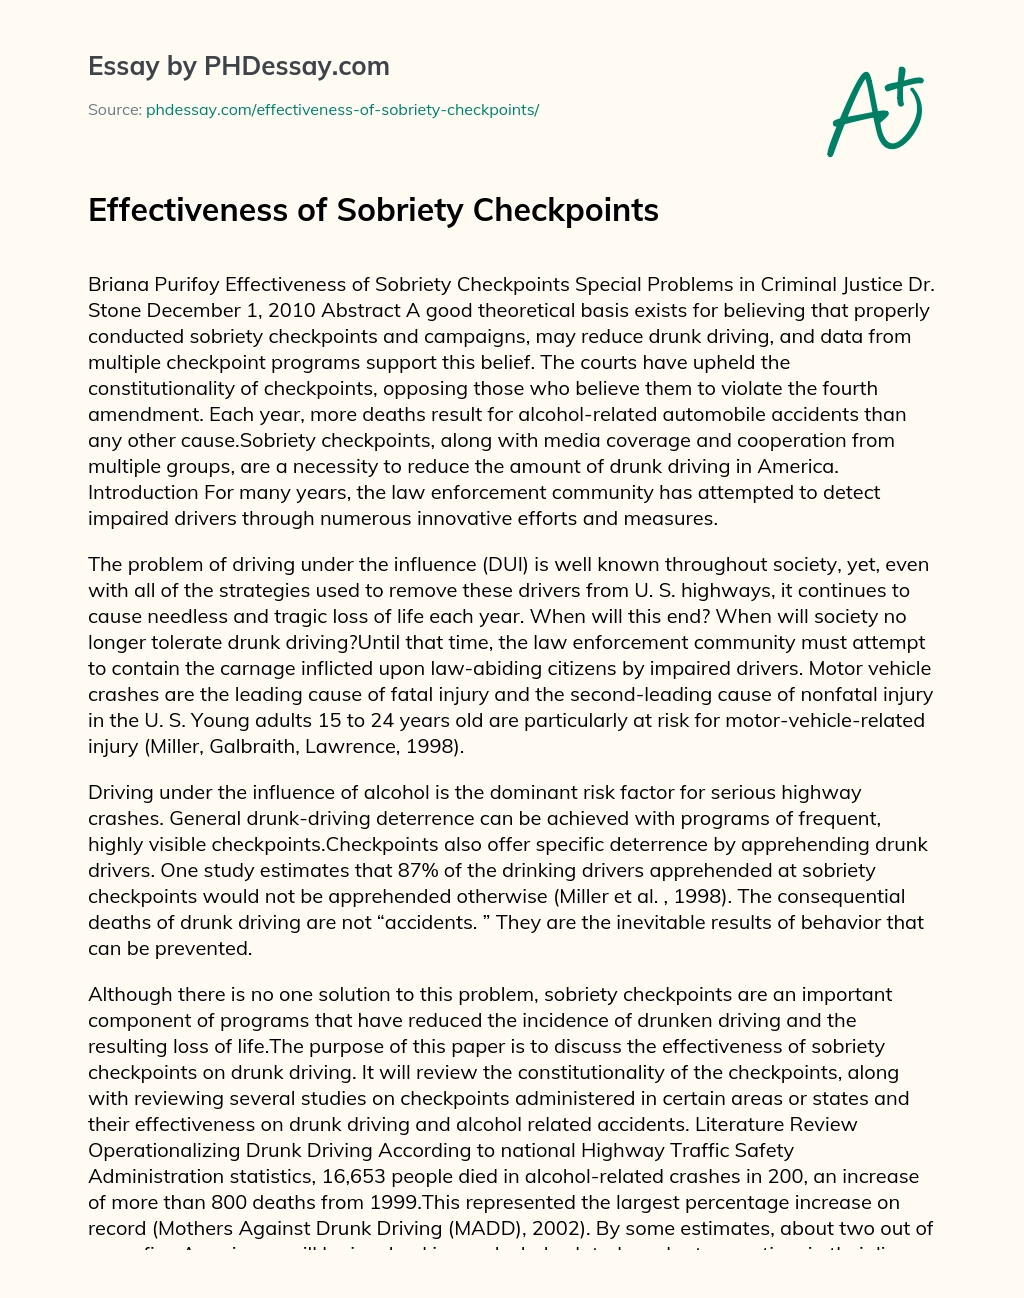 Effectiveness of Sobriety Checkpoints essay